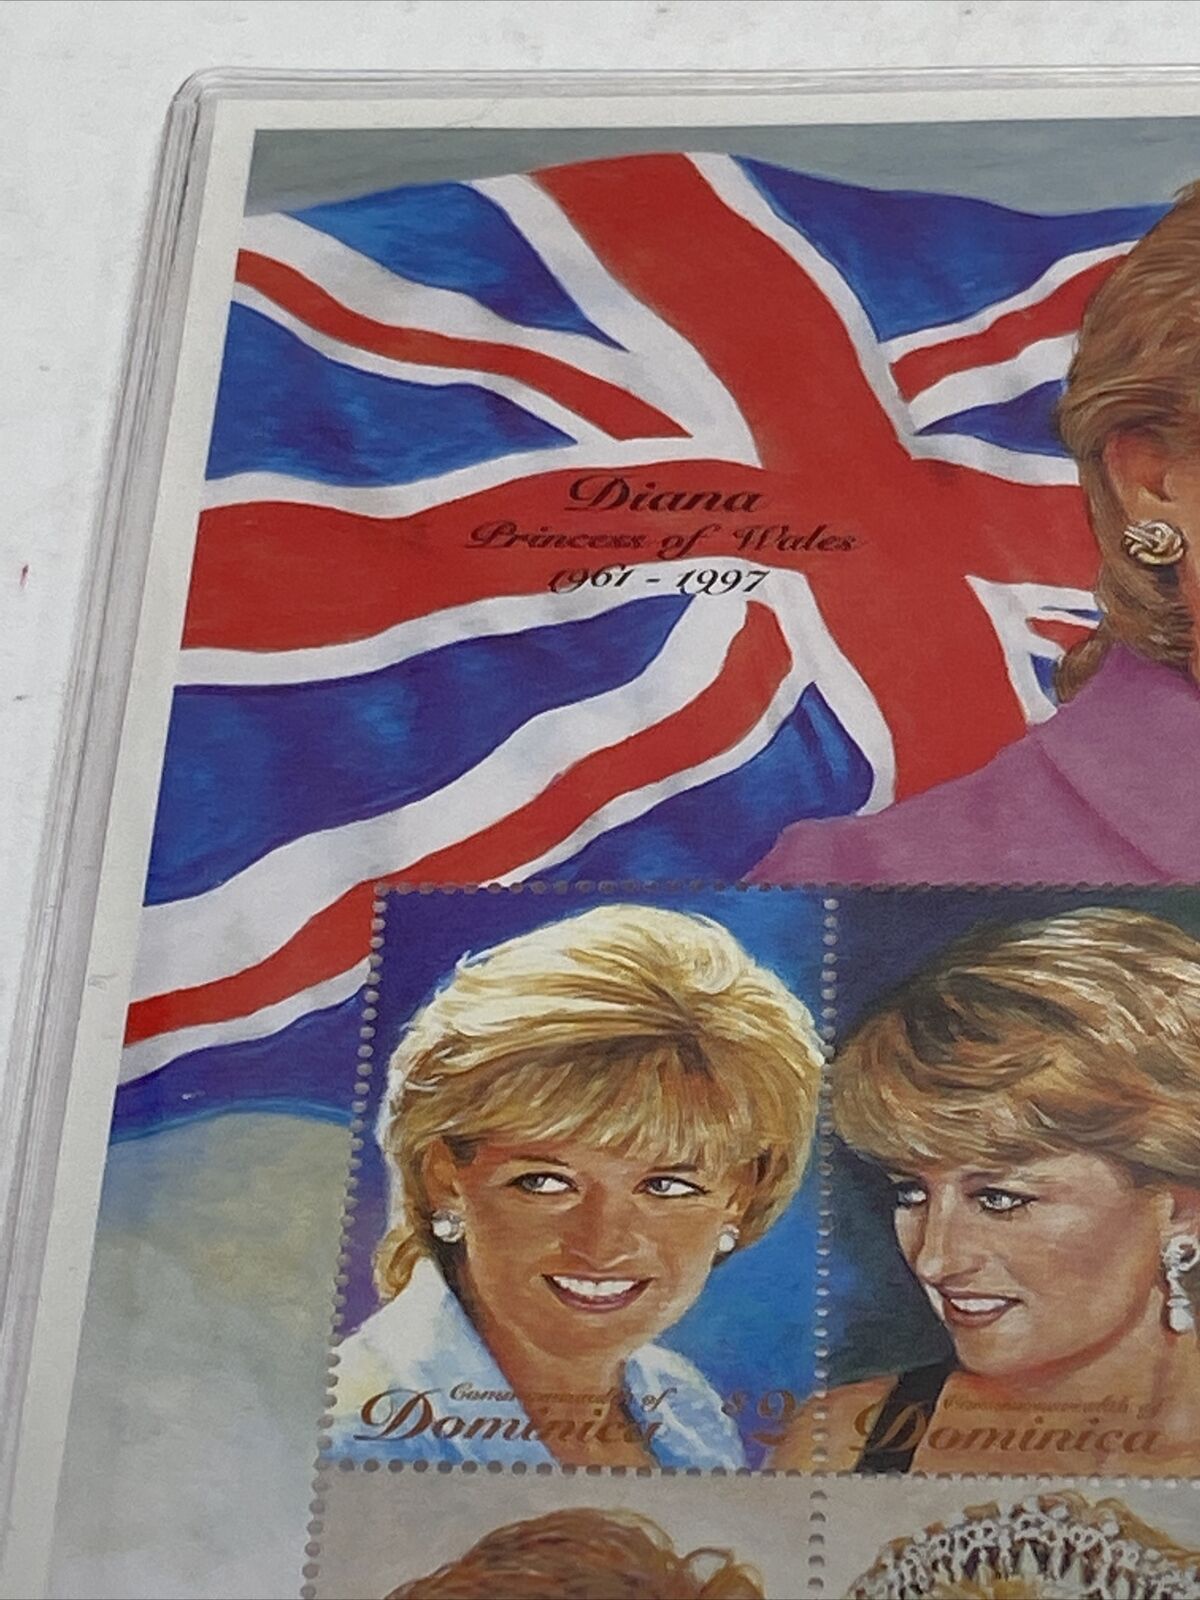 Princess Diana Royal Portraits Plate Block Of 4 Stamps Authenticity Certificate Без бренда - фотография #5